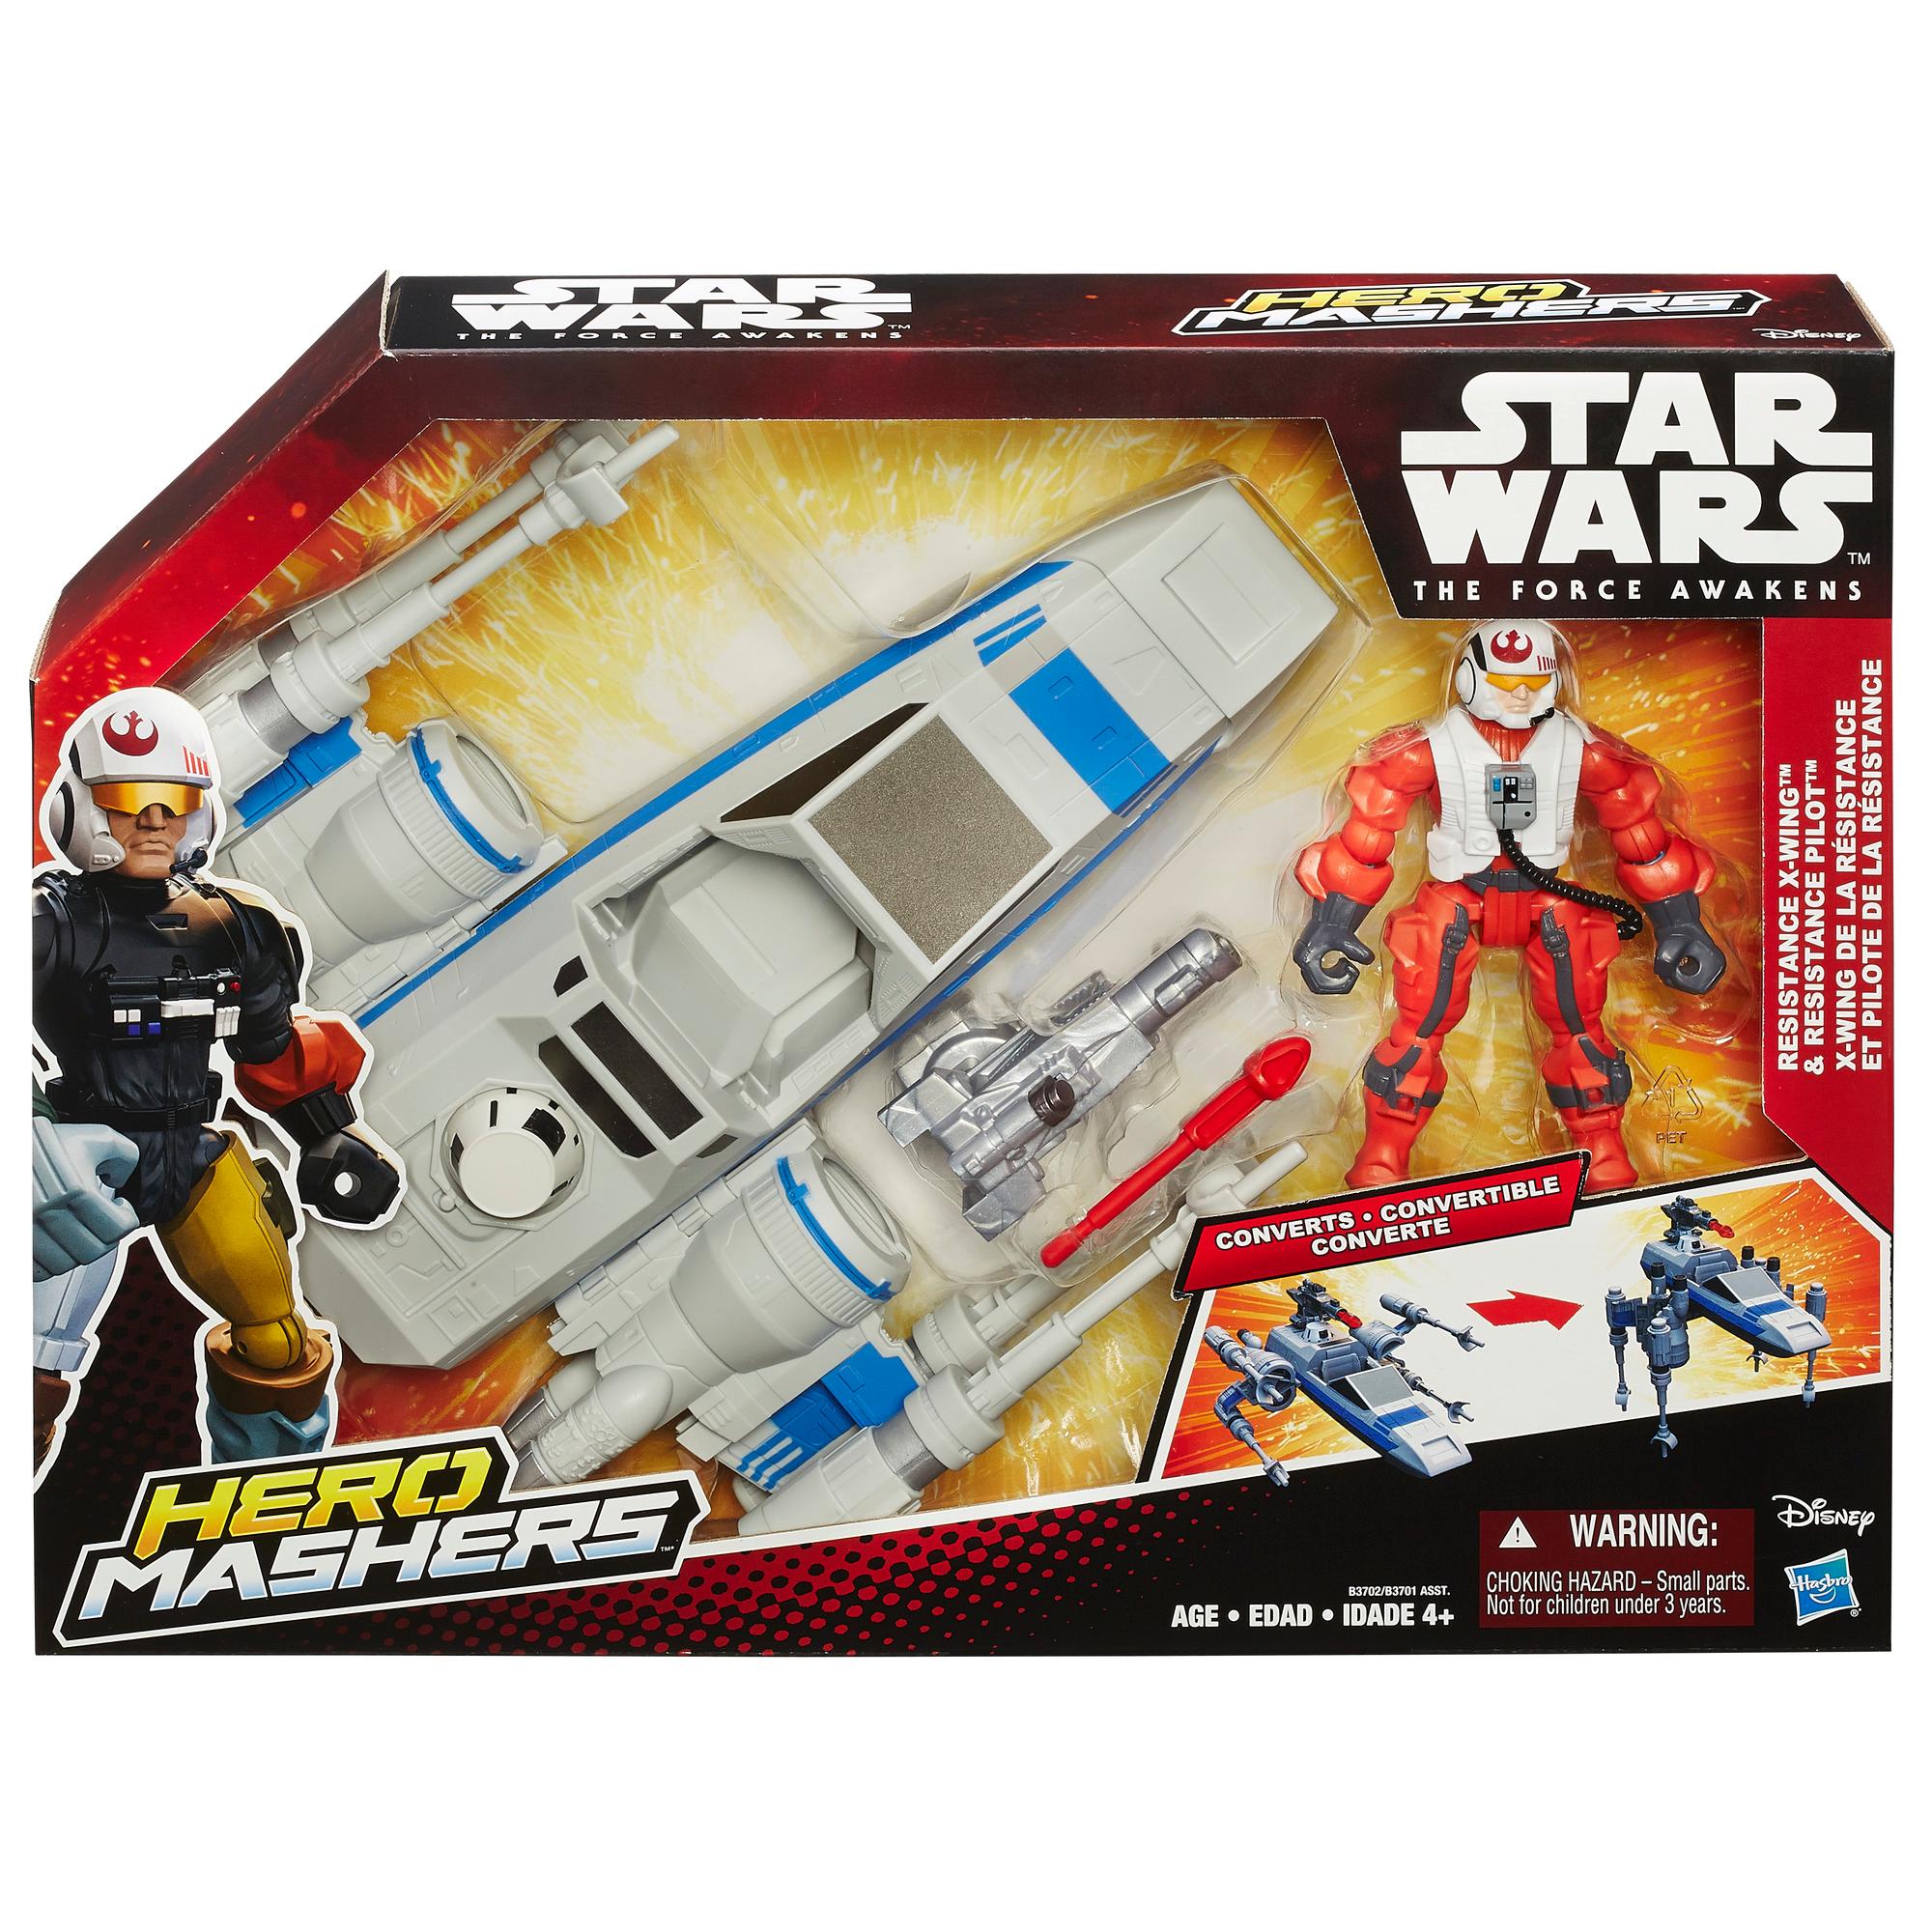 Star Wars The Force Awakens Hero Mashers Toy Resistance X-Wing & Pilot 4 Years